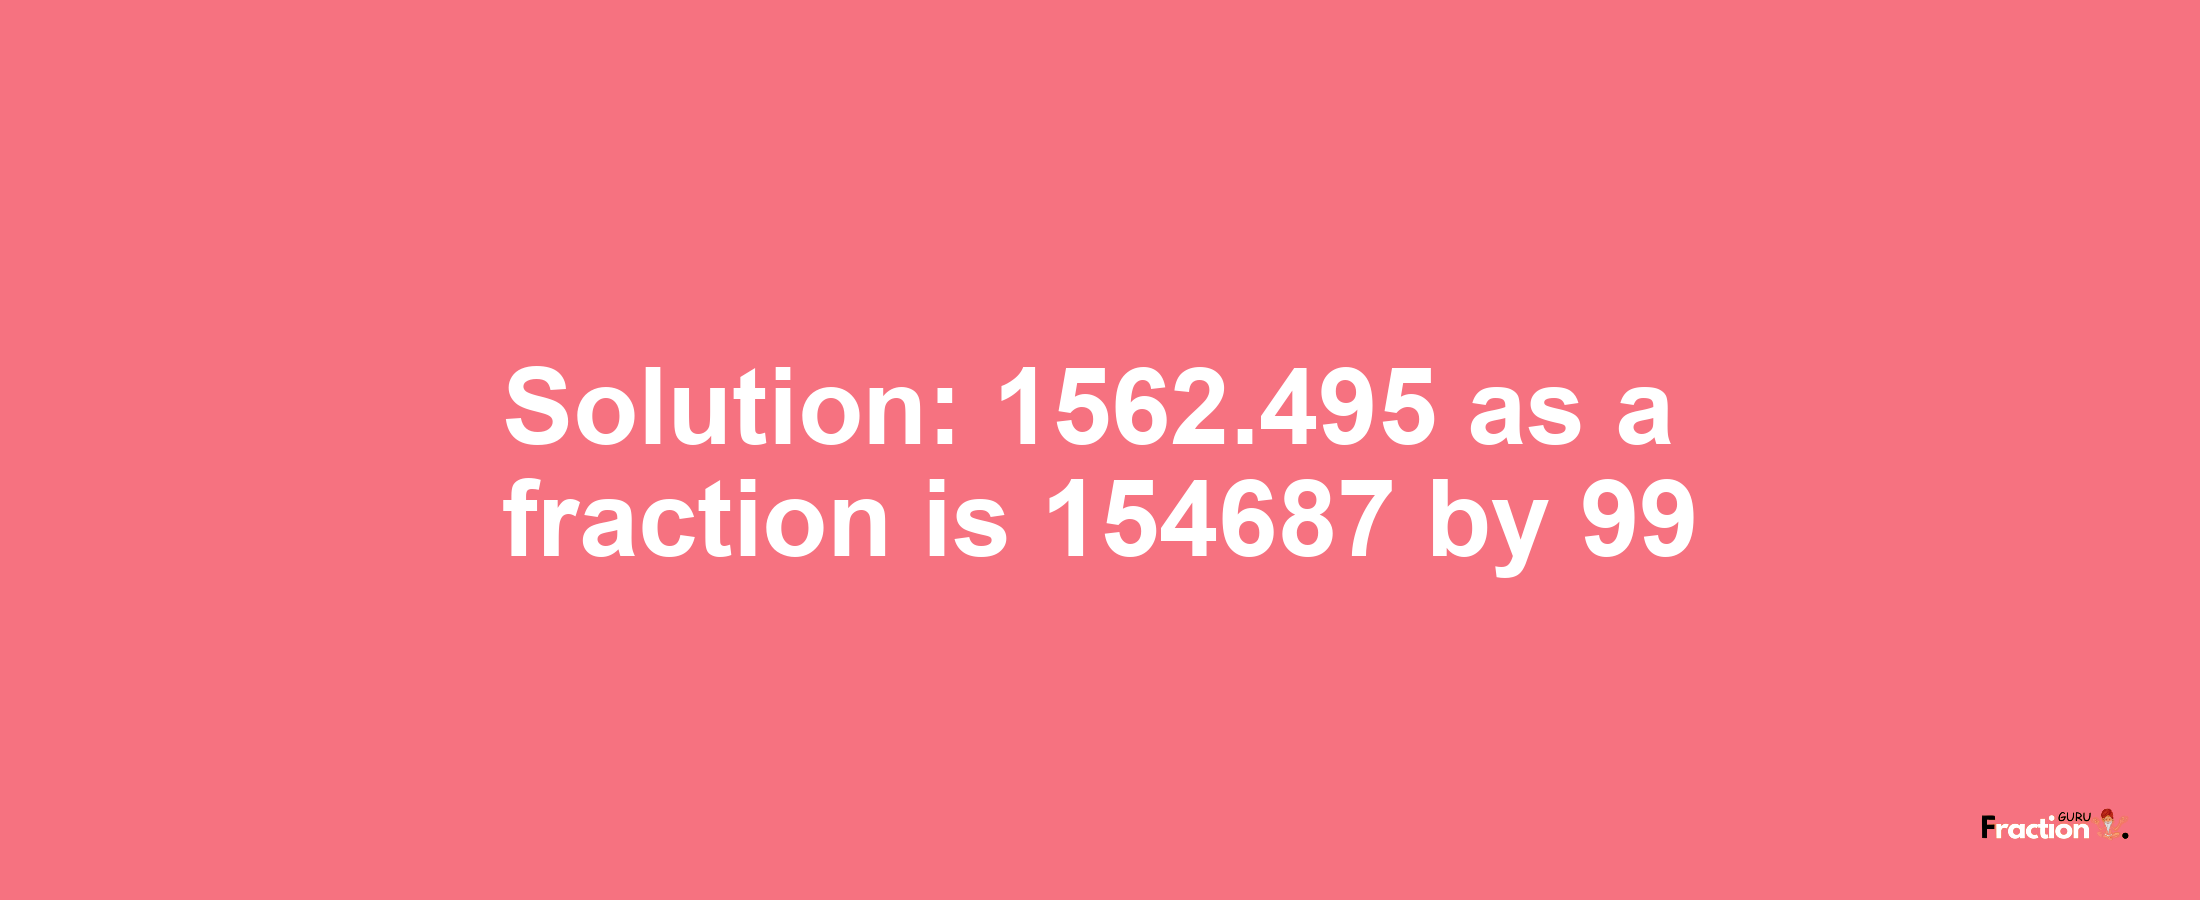 Solution:1562.495 as a fraction is 154687/99